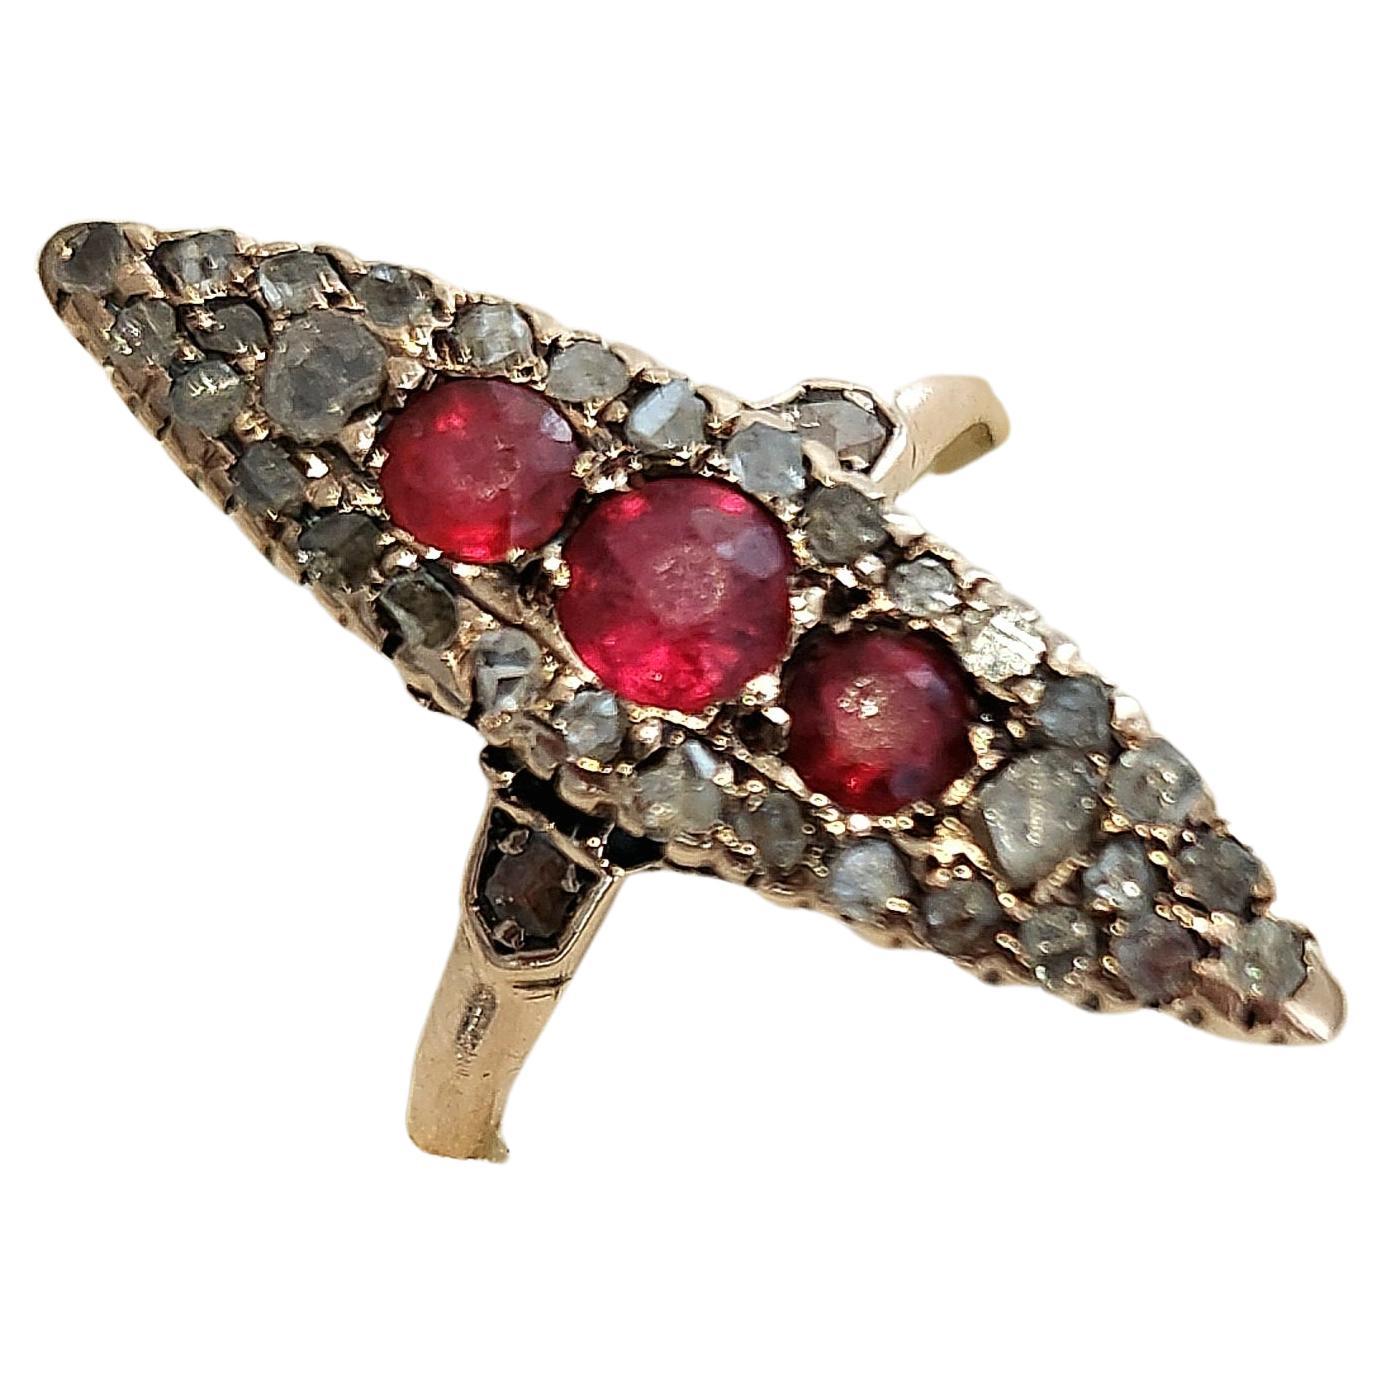 Antique imperial russian era 1889/1900.c ring centered with 3 natural spinel rubies blood color flanked with rose cut diamonds ring was made in moscow between 1889/1900.c tsarist era hall marked 56 imperial russian gold standard and moscow assayer